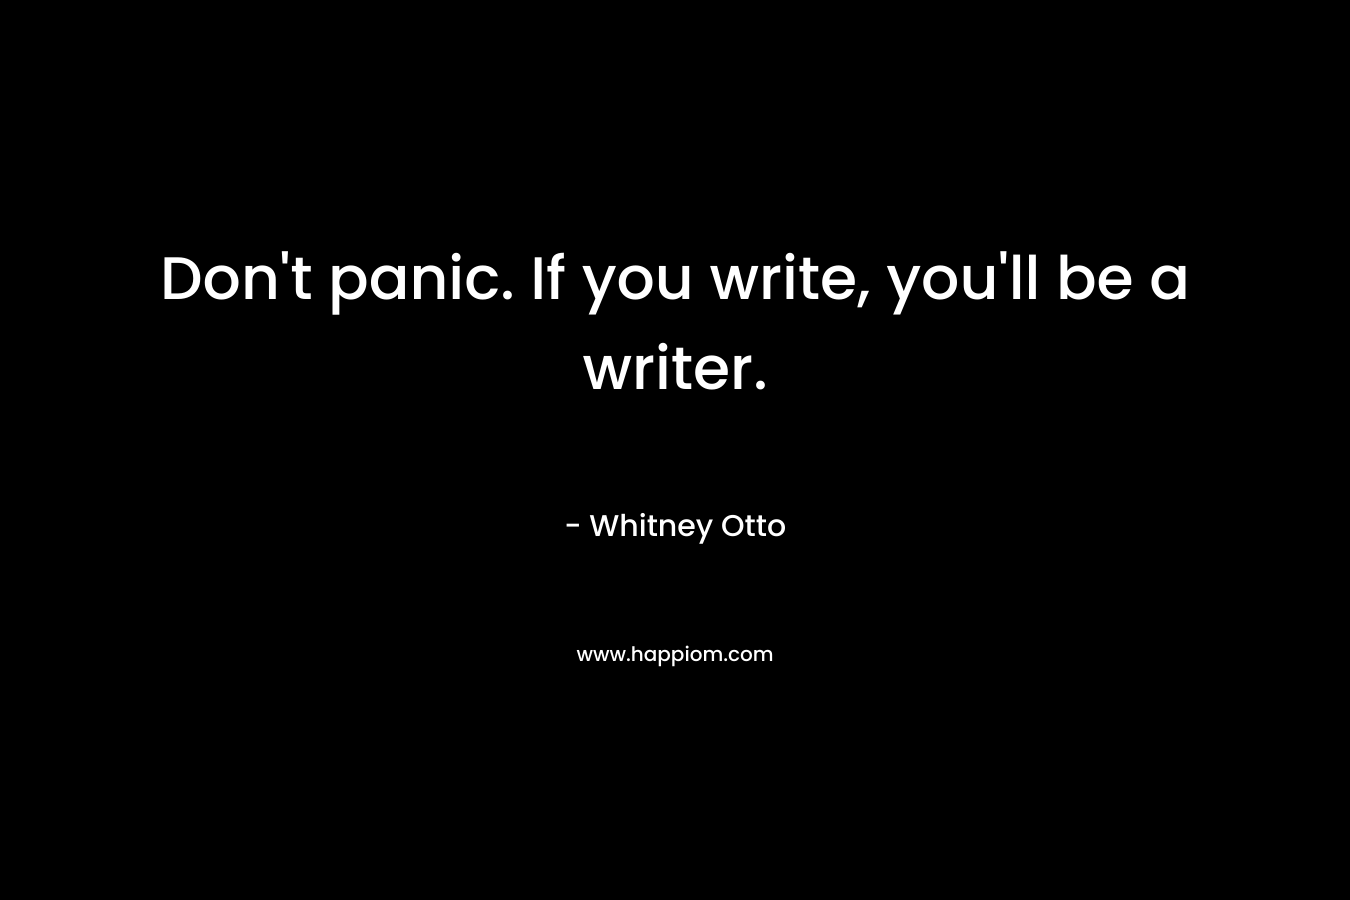 Don’t panic. If you write, you’ll be a writer. – Whitney Otto